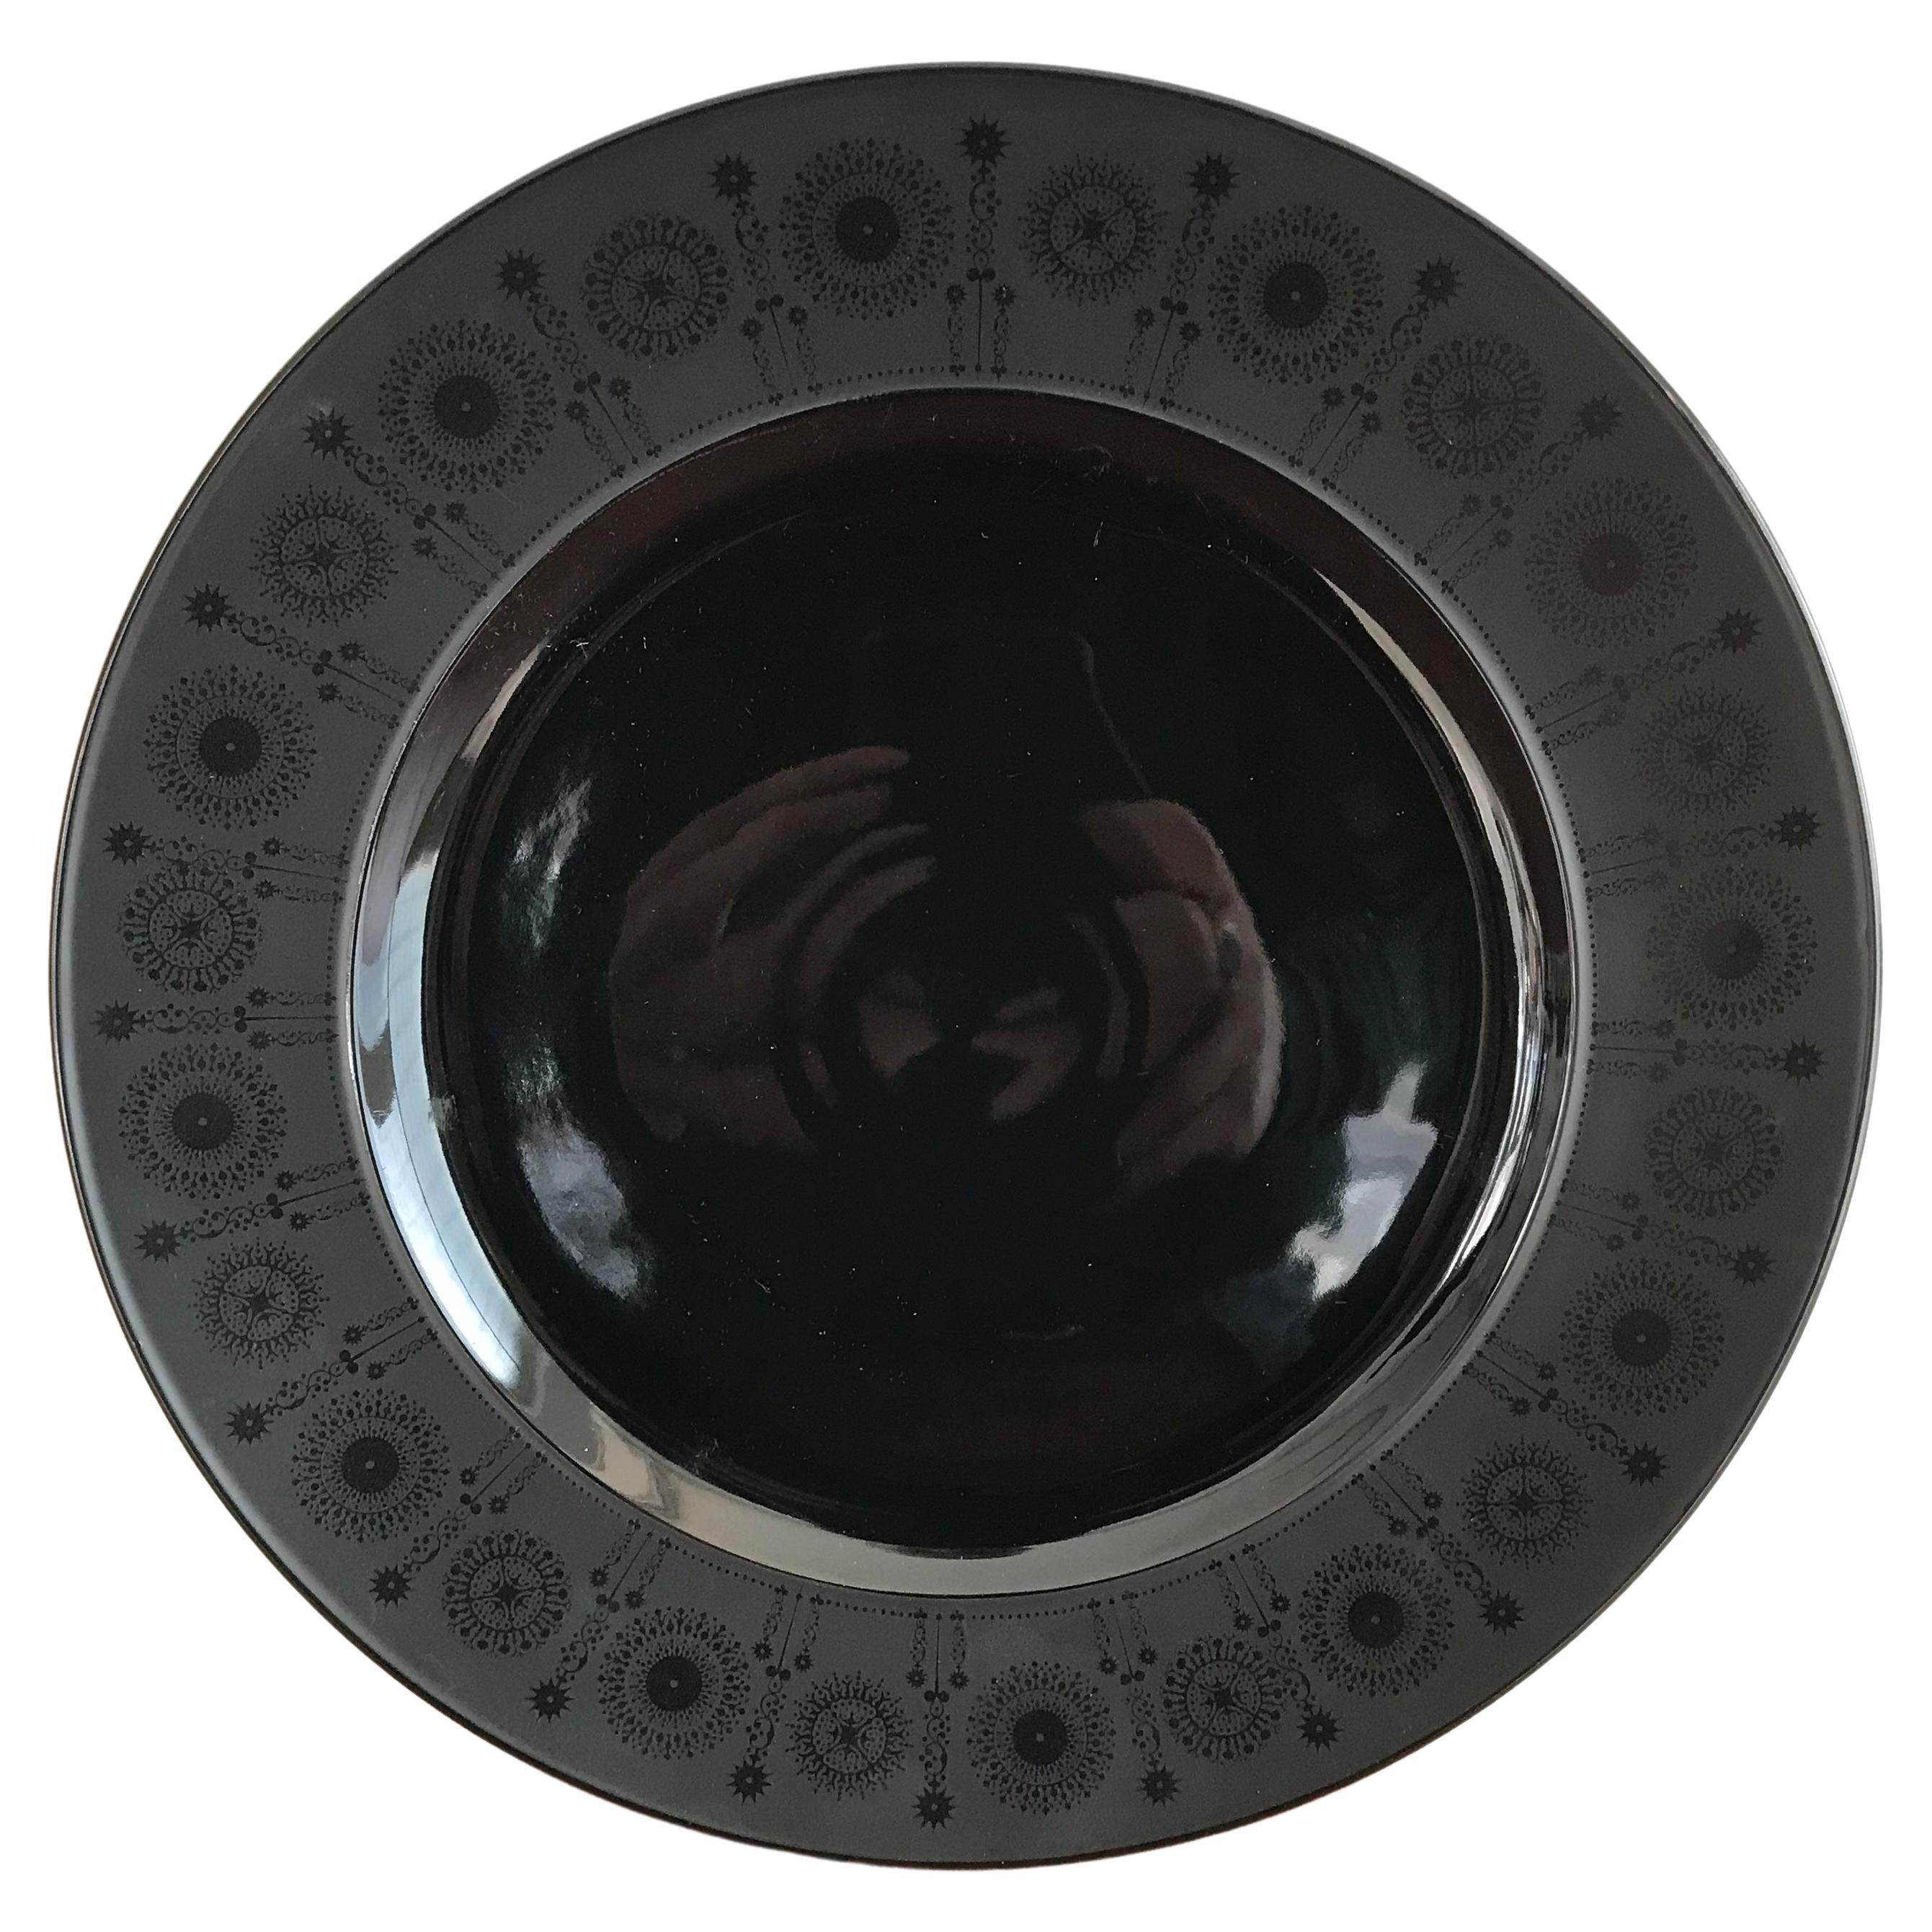 Tapio Wirkaala "Porcelaine Noire" Dish Plate for Rosenthal Studio Linie, 1970s For Sale